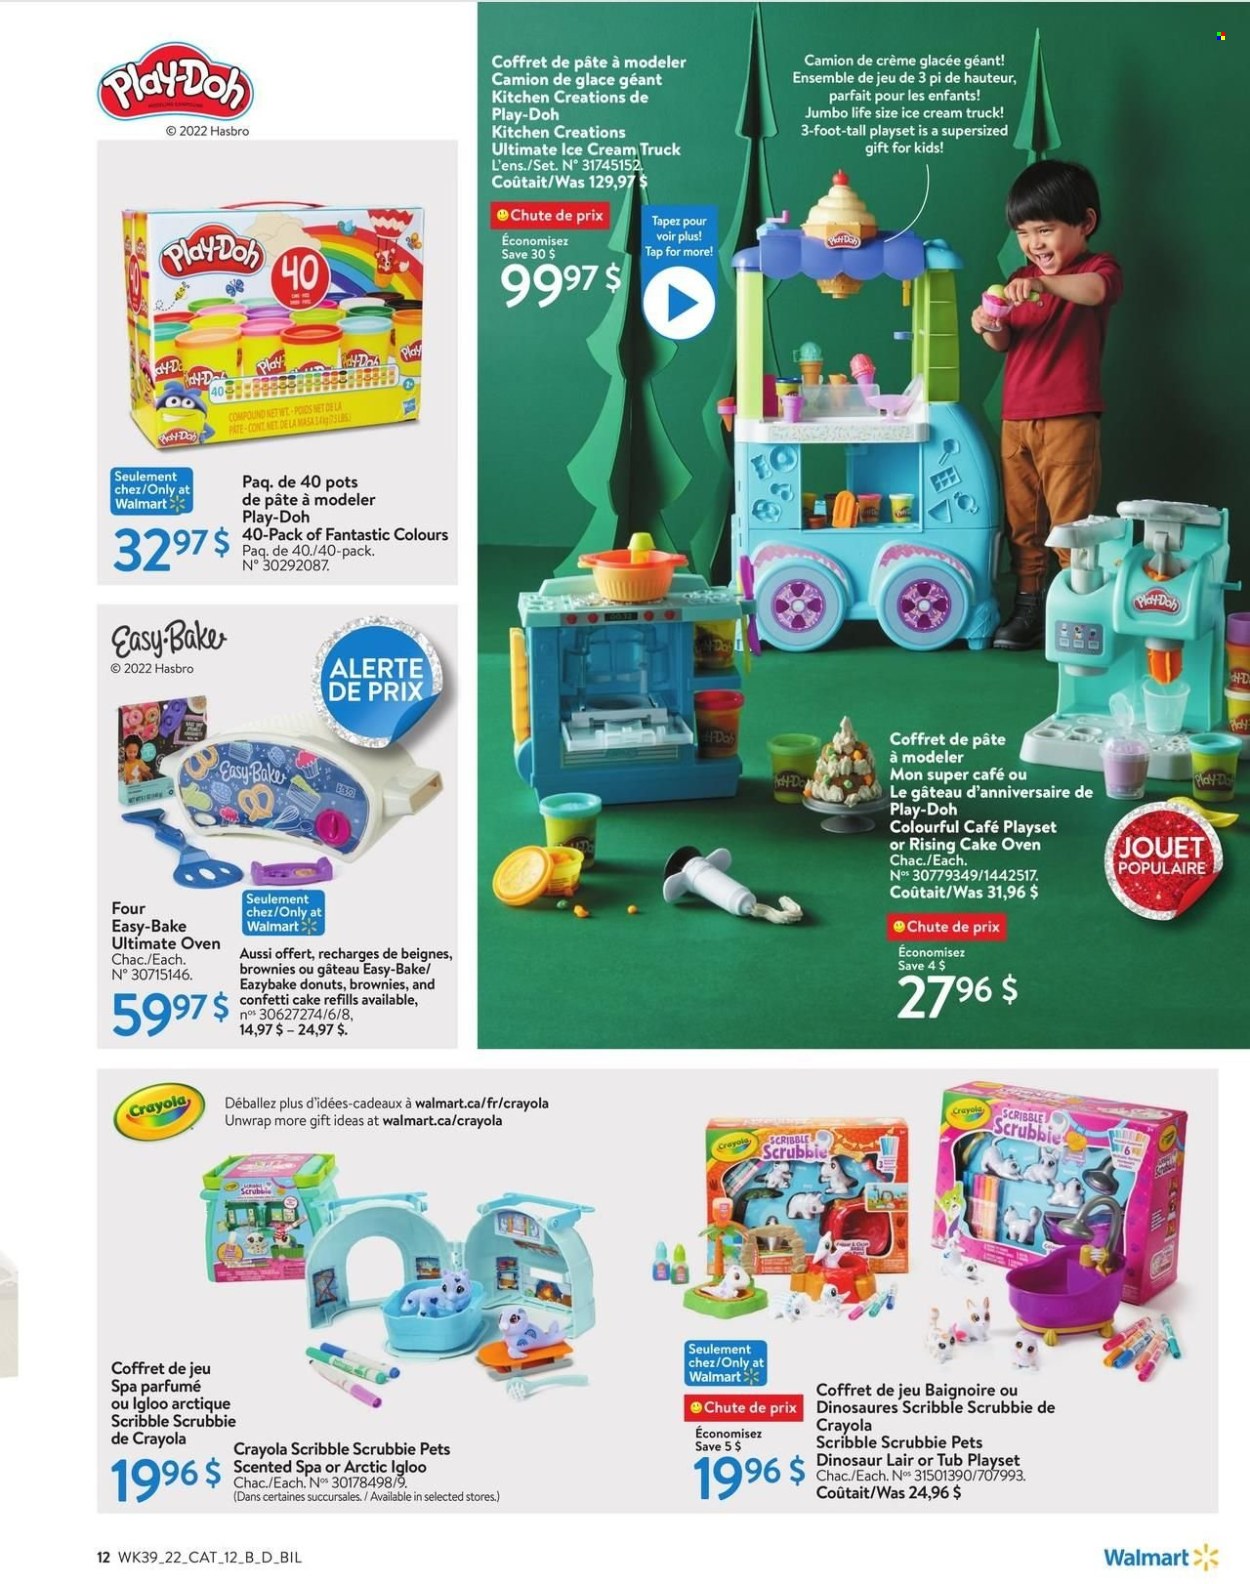 thumbnail - Walmart Flyer - October 20, 2022 - December 24, 2022 - Sales products - cake, donut, ice cream, pot, crayons, oven, play set, Hasbro, dinosaur, Play-doh. Page 12.